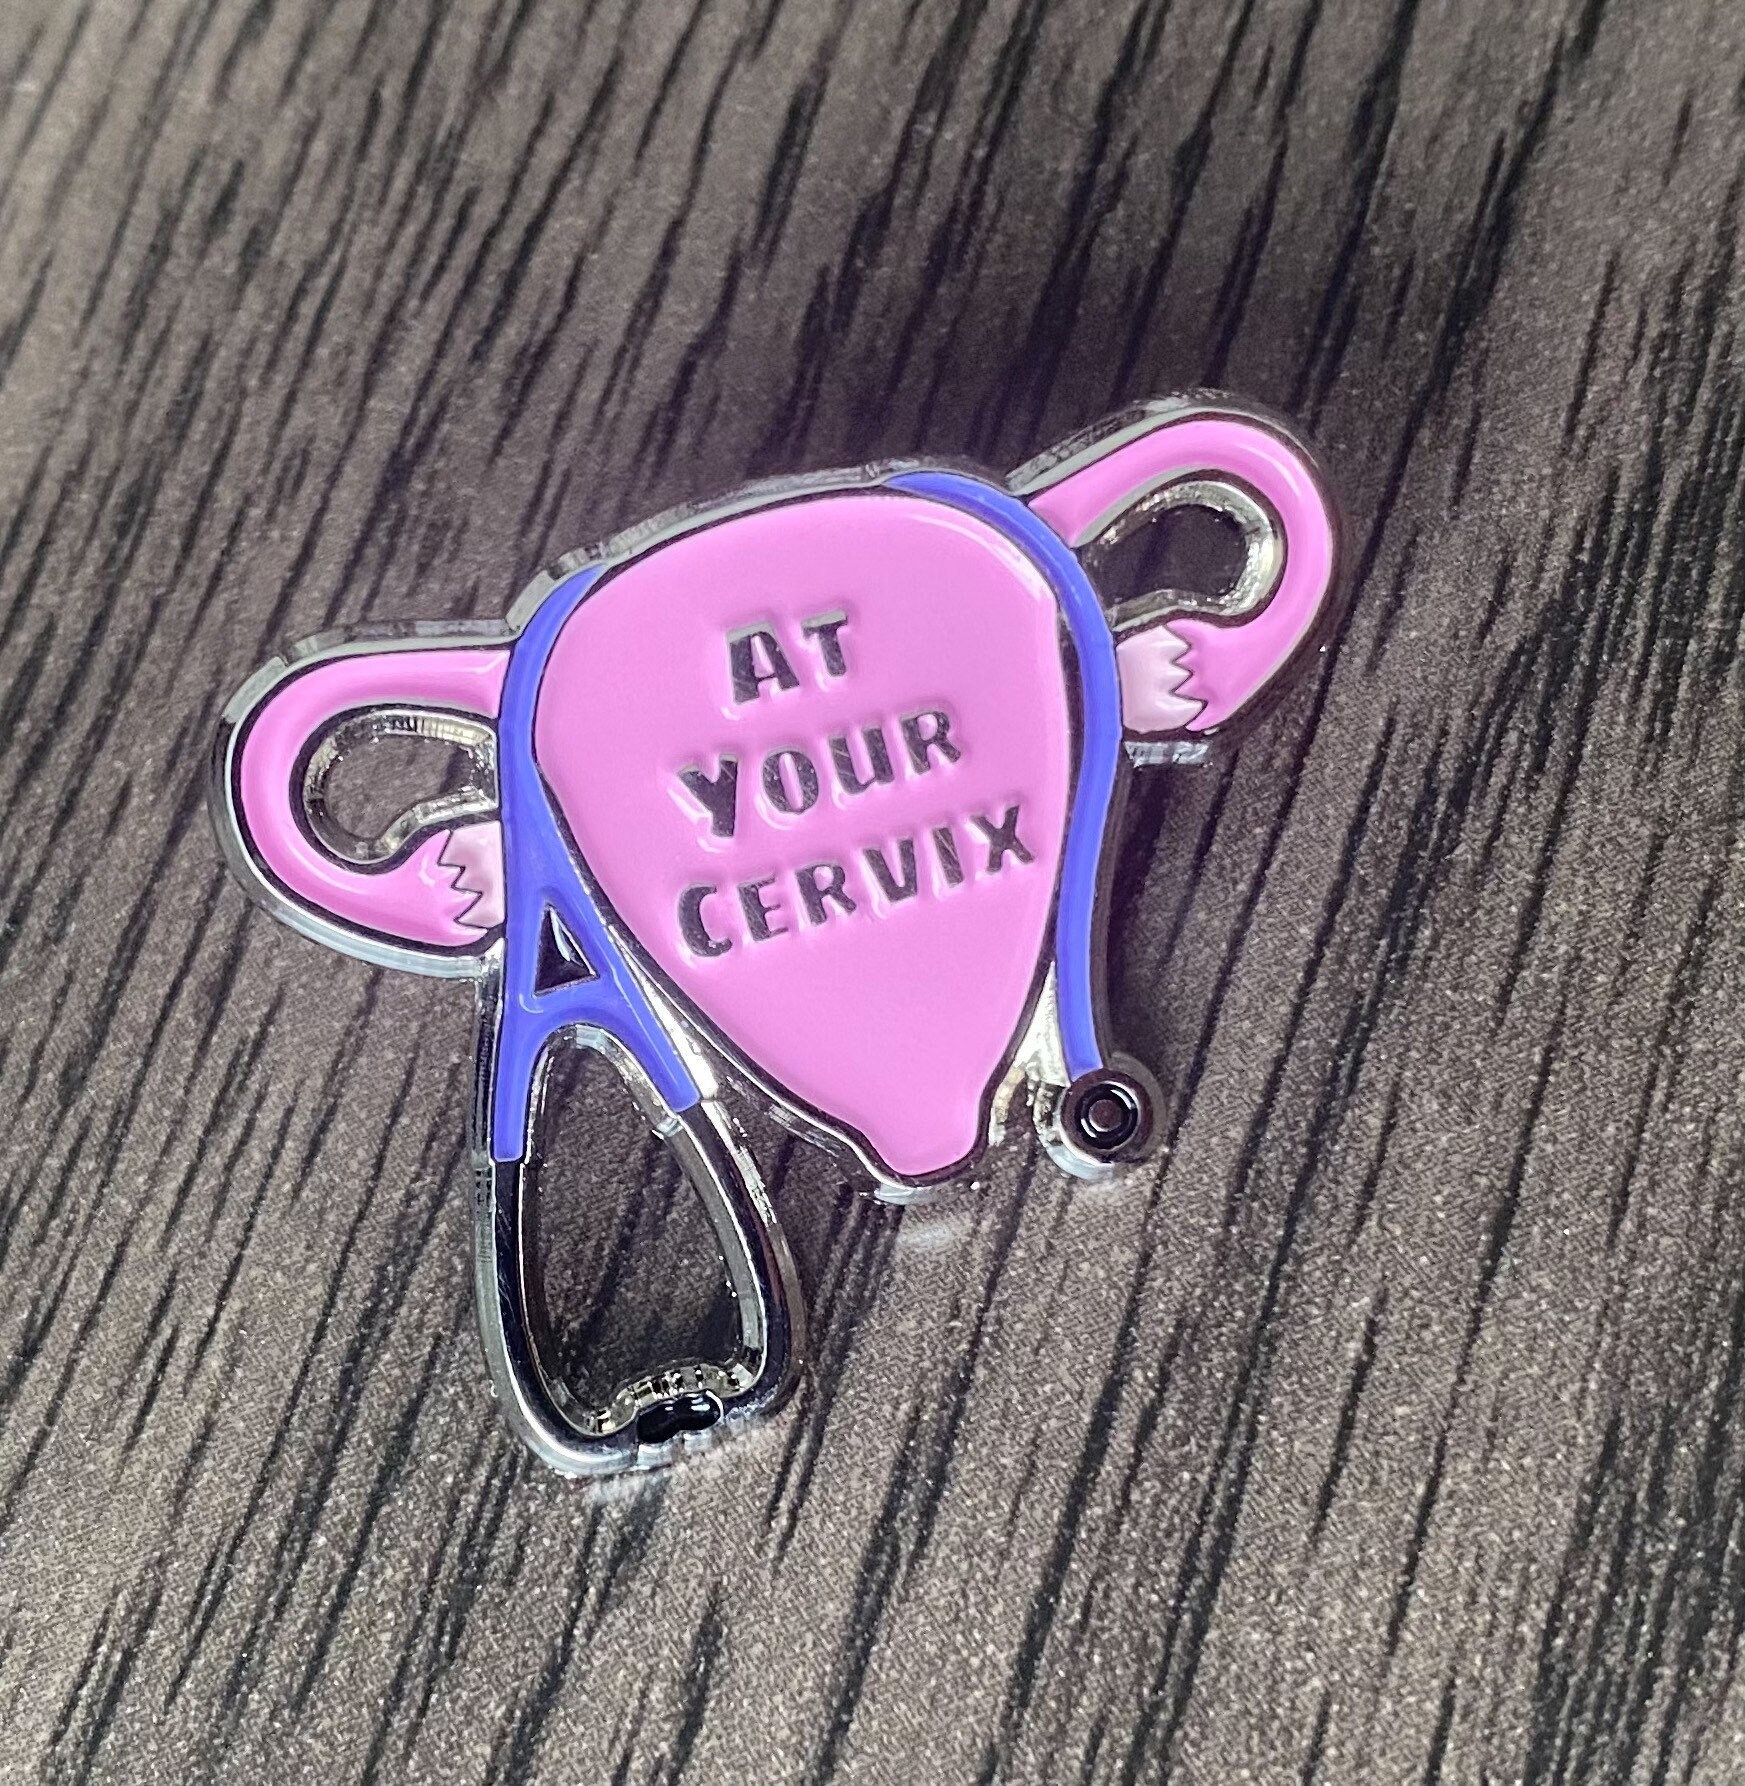 Obgyn at Your Cervix Enamel Pin / Obstetrics Gynecology / Doctor